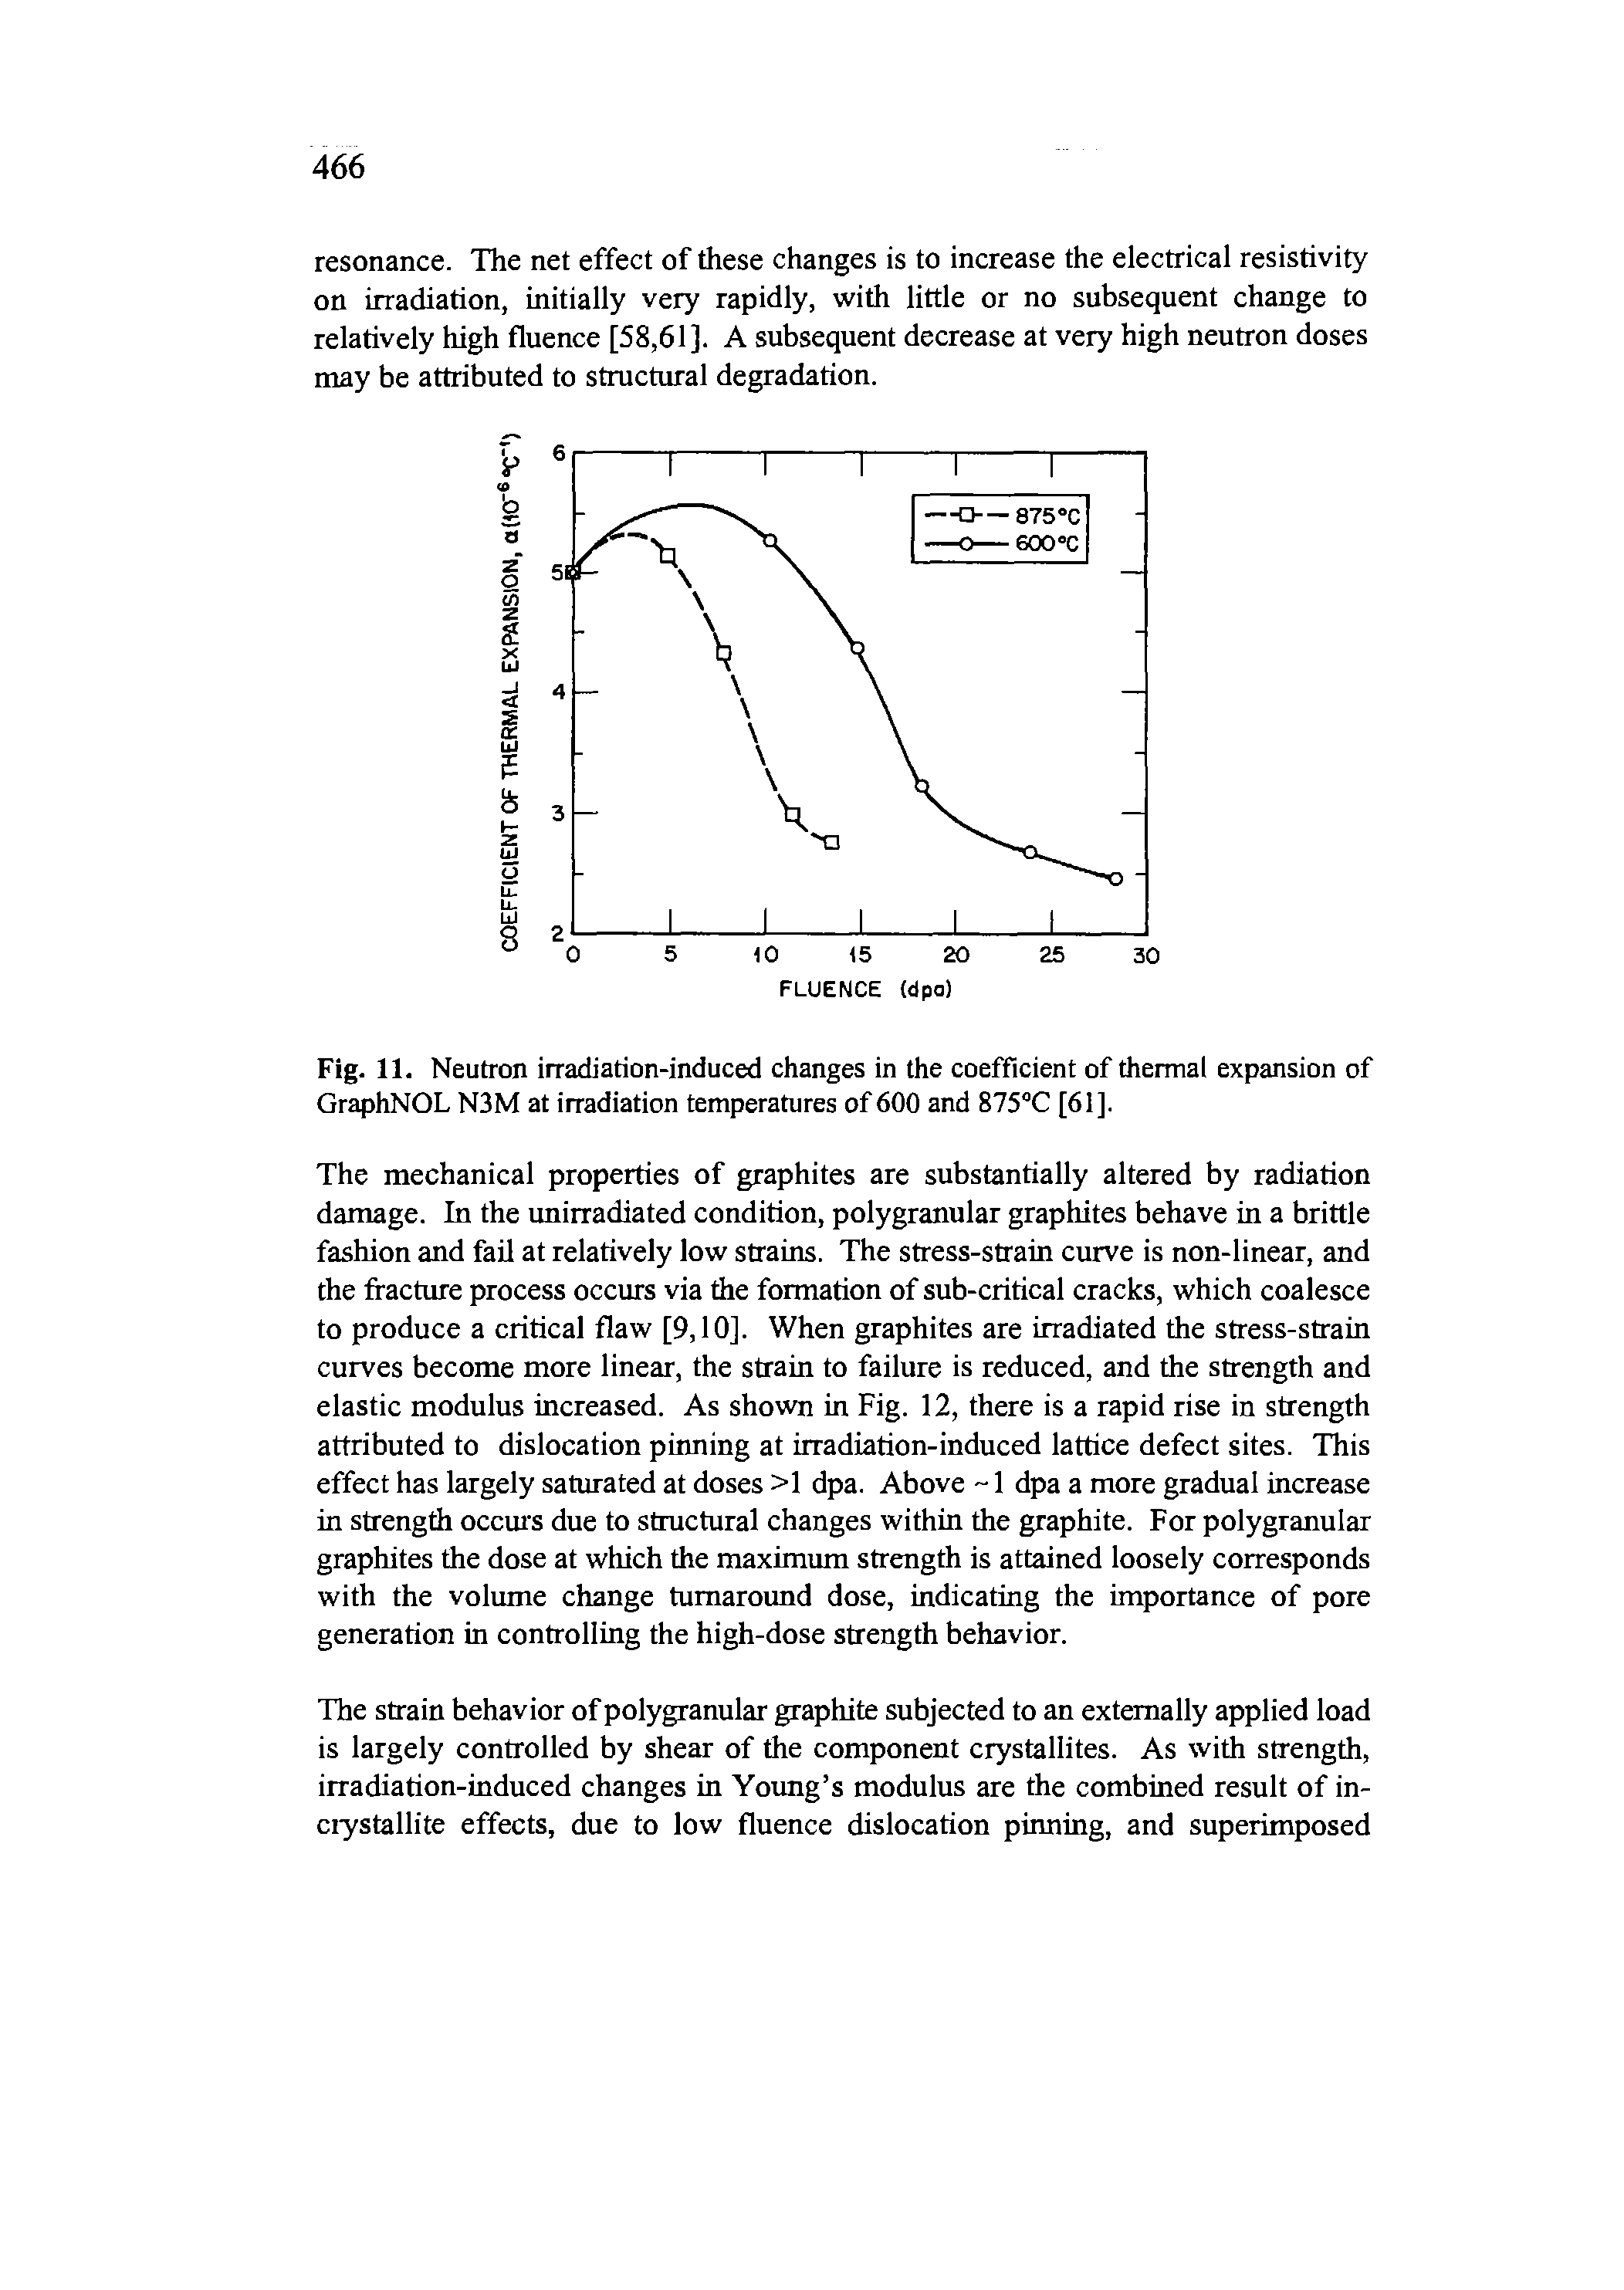 Fig. 11. Neutron irradiation-induced changes in the coefficient of thermal expansion of GraphNOL N3M at irradiation temperatures of 600 and 875 C [61].